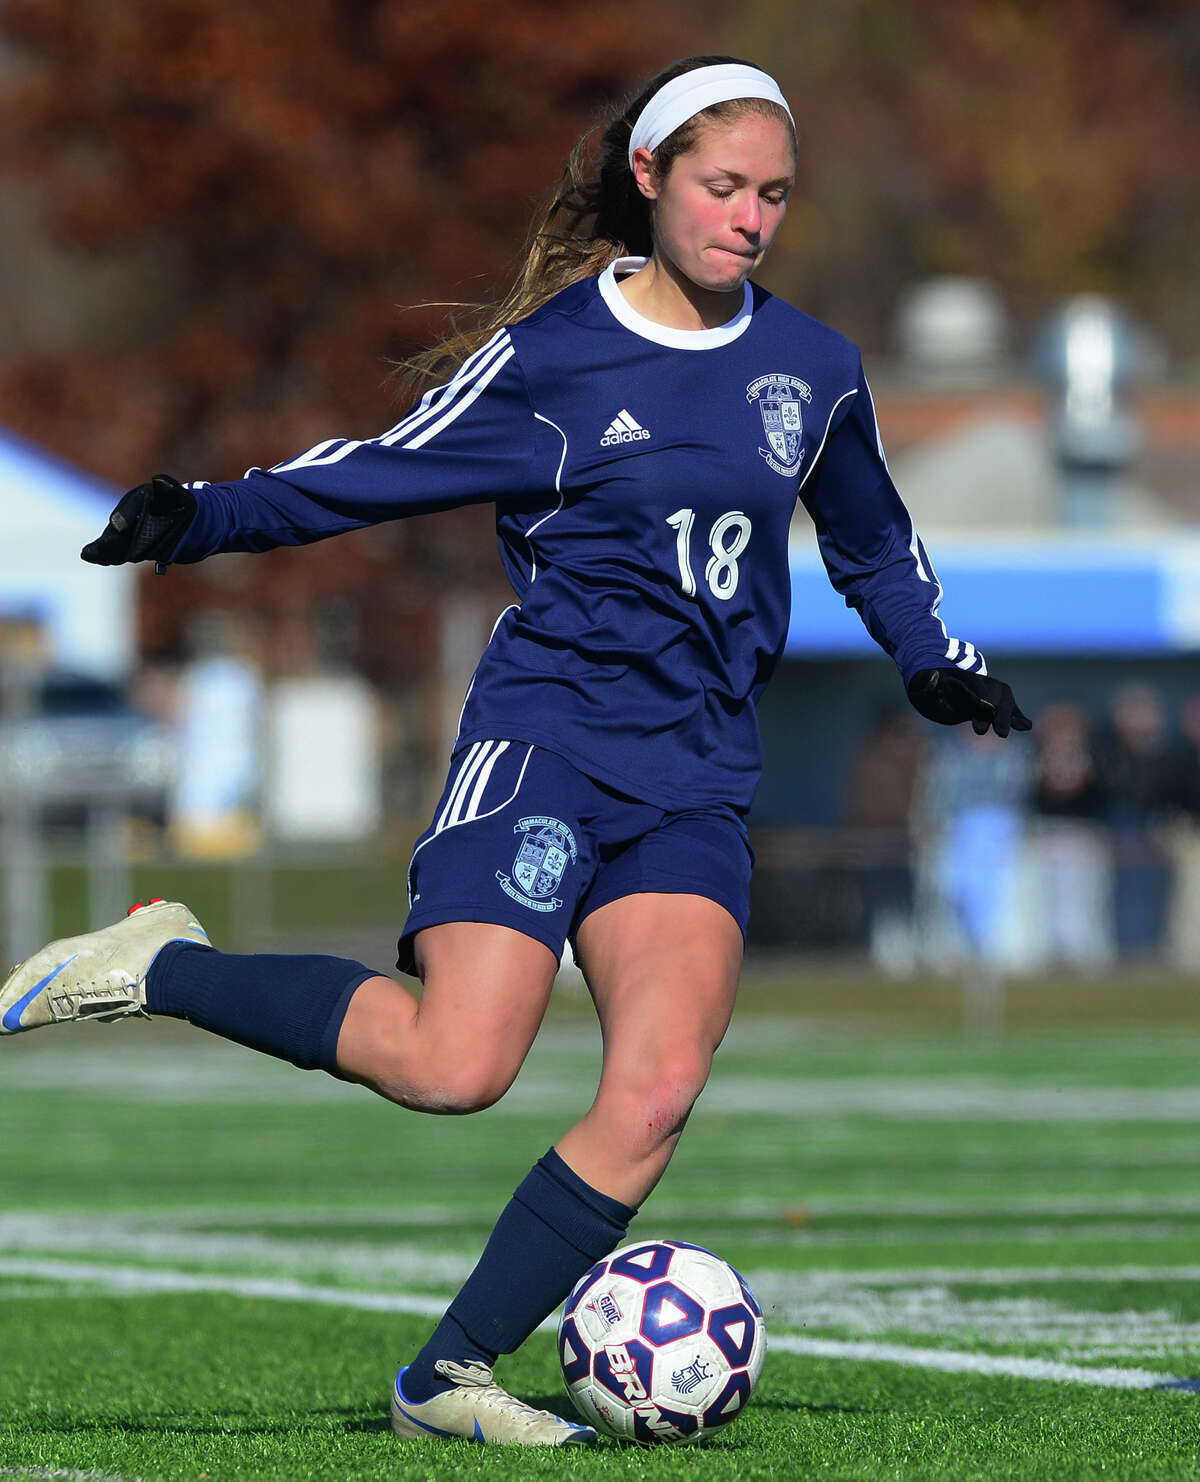 FILE PHOTO: Class L CIAC state girls soccer championship action between Immaculate and Avon in West Haven, Conn. on Saturday Nov. 15, 2014. Immaculate No. 18 Caitlyn Linden.